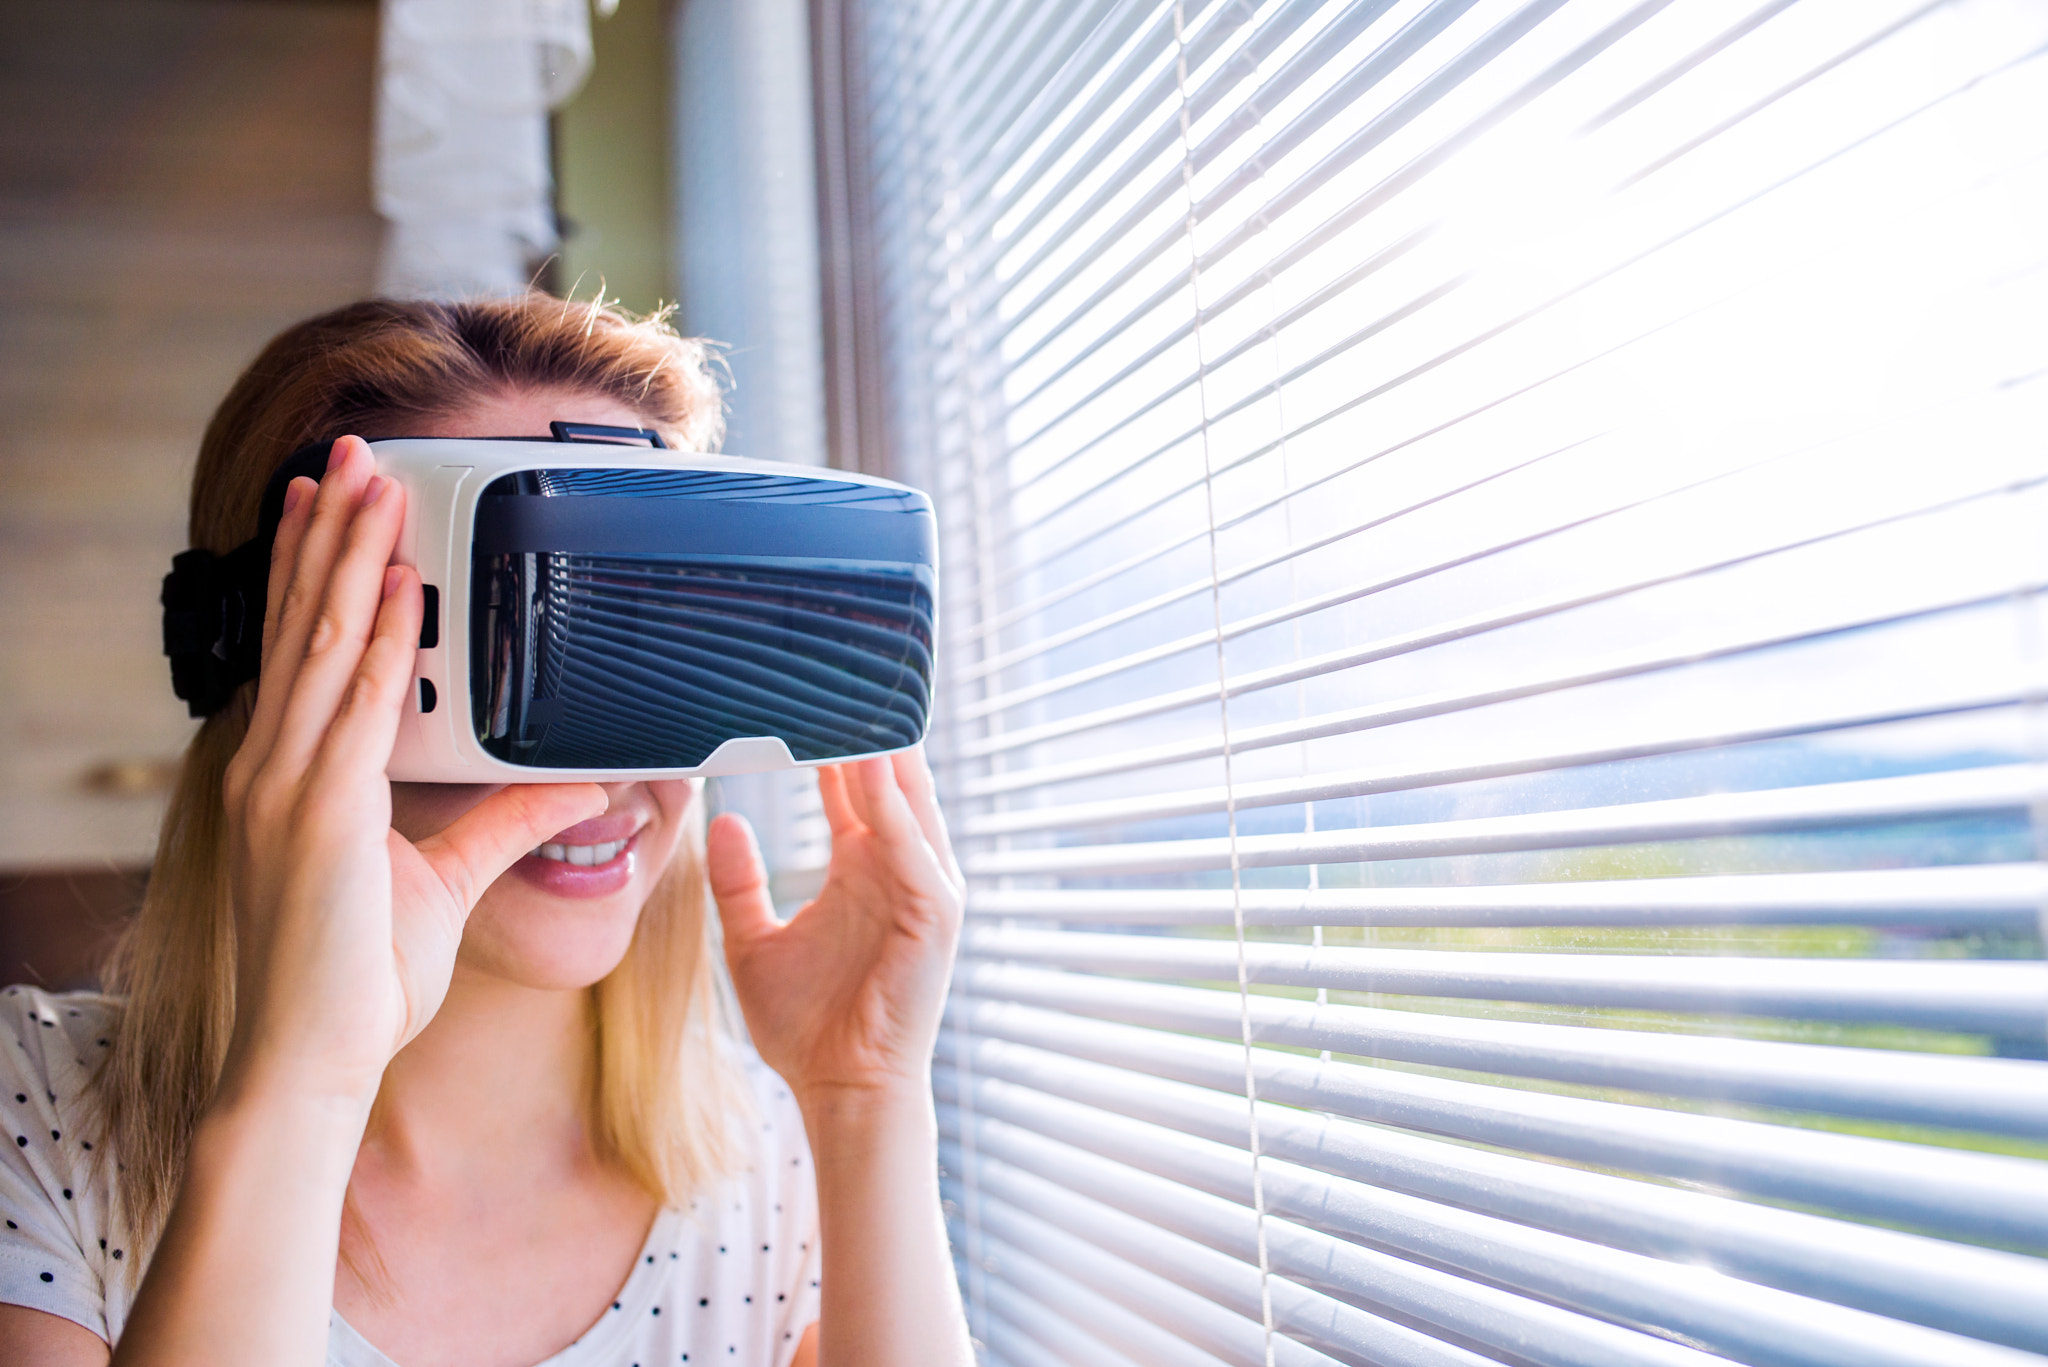 Woman wearing virtual reality goggles standing in a kitchen